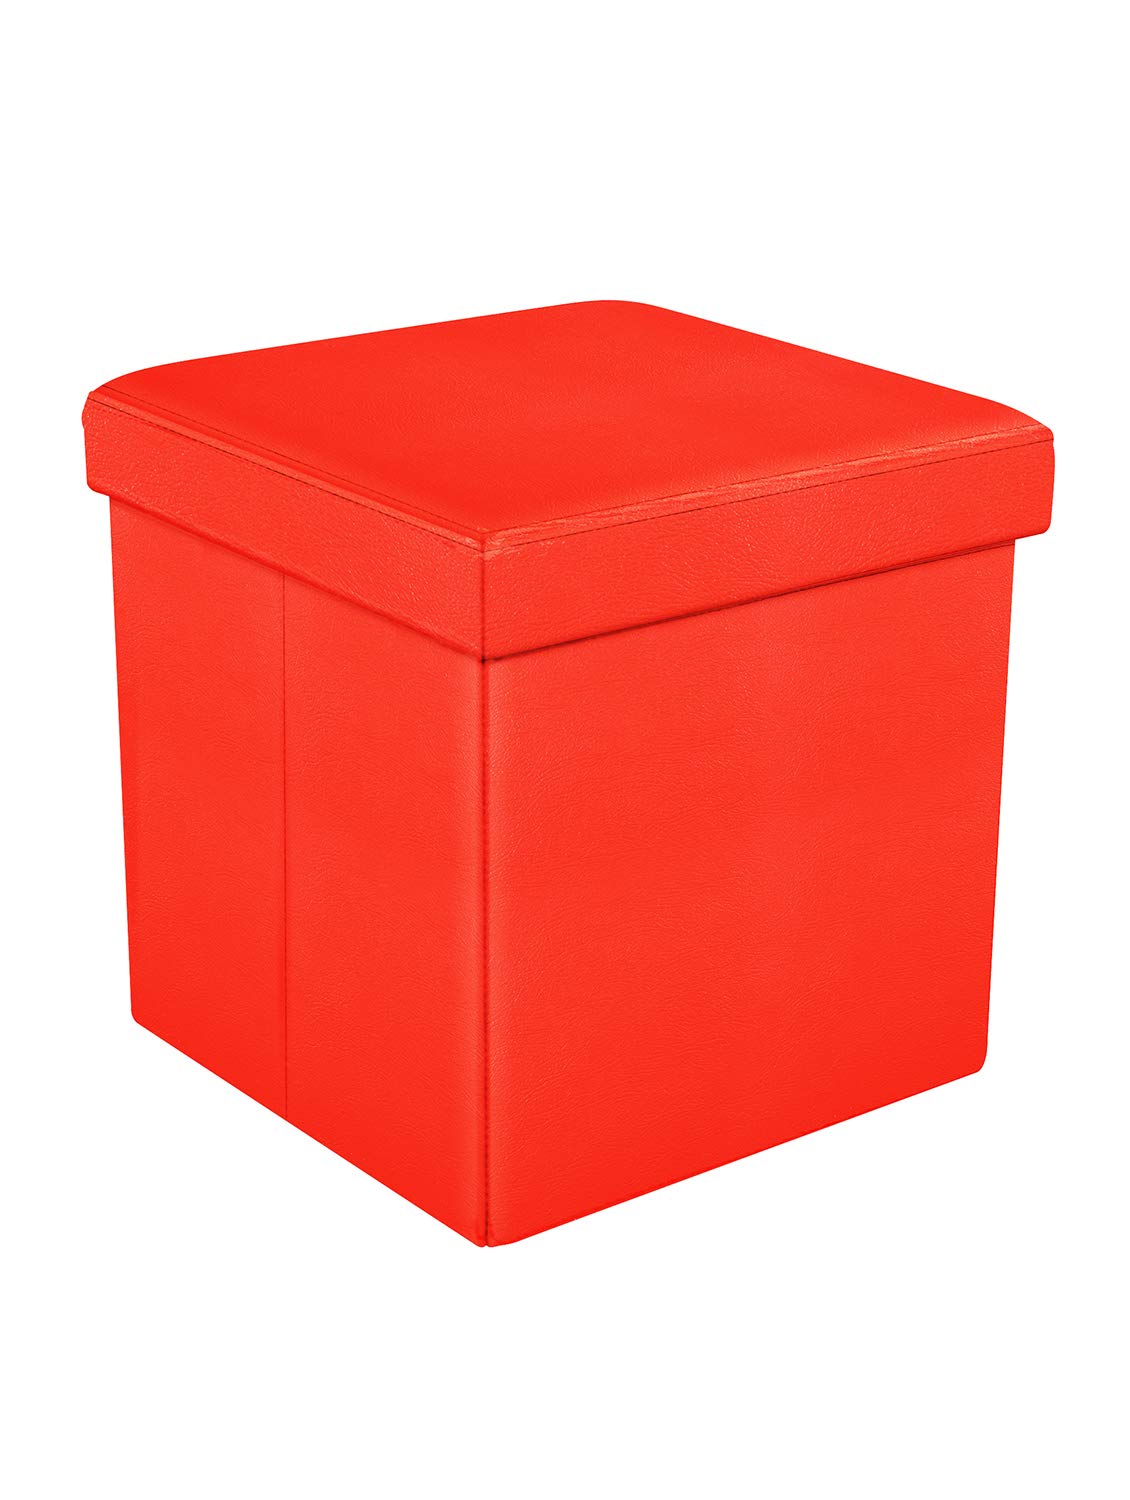 Story@Home Folding Collapsible Ottoman Foot Rest Stool for Home Living Room